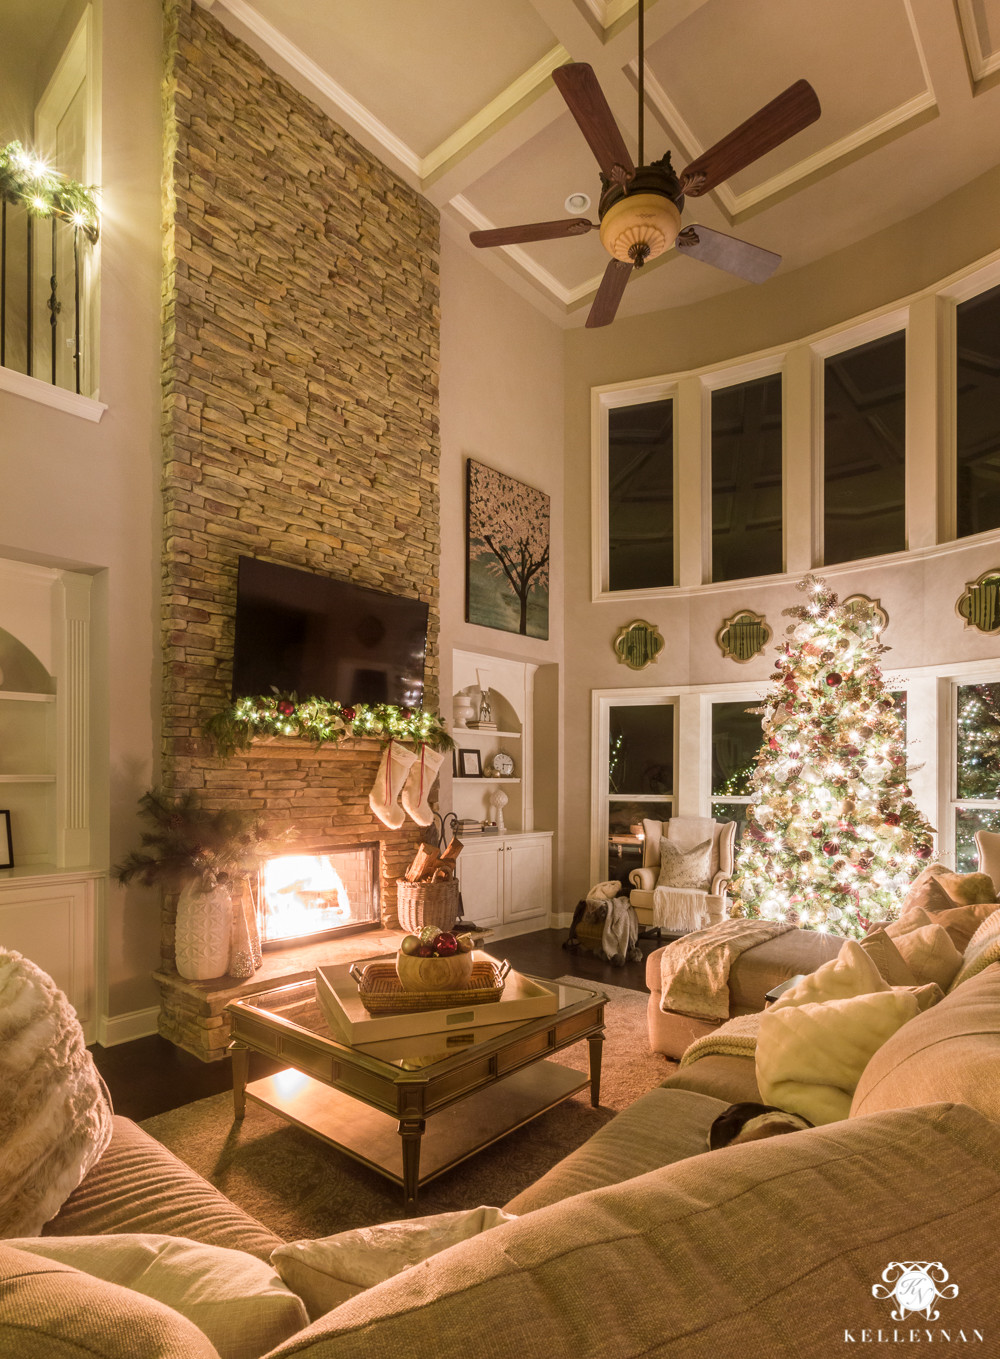 Christmas Lights In Living Room
 Nighttime Christmas Home Tour with Magical Glowing